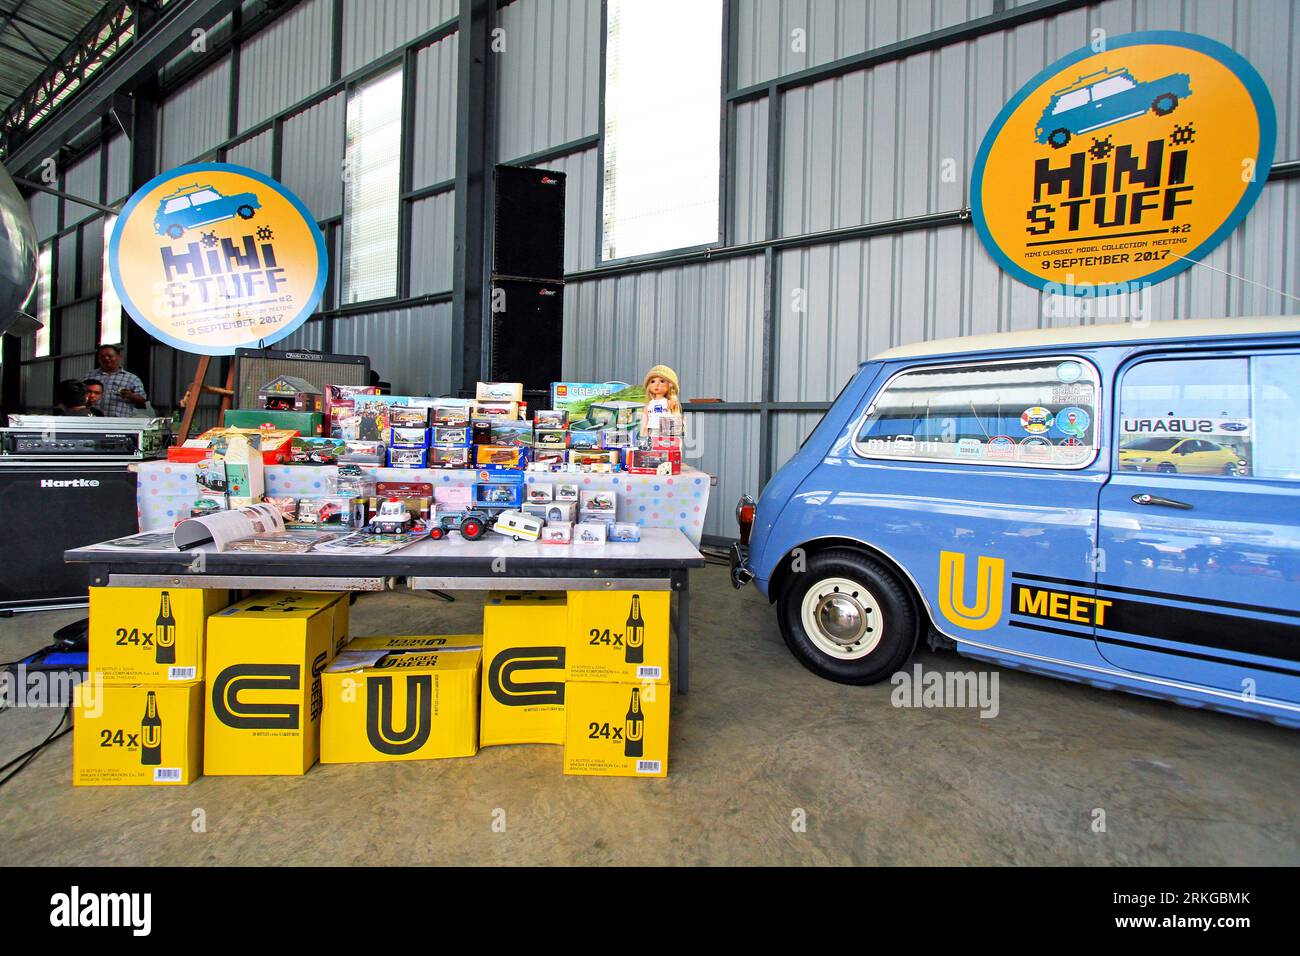 A classic blue Mini Austin parked in a garage filled with a plethora of toys Stock Photo